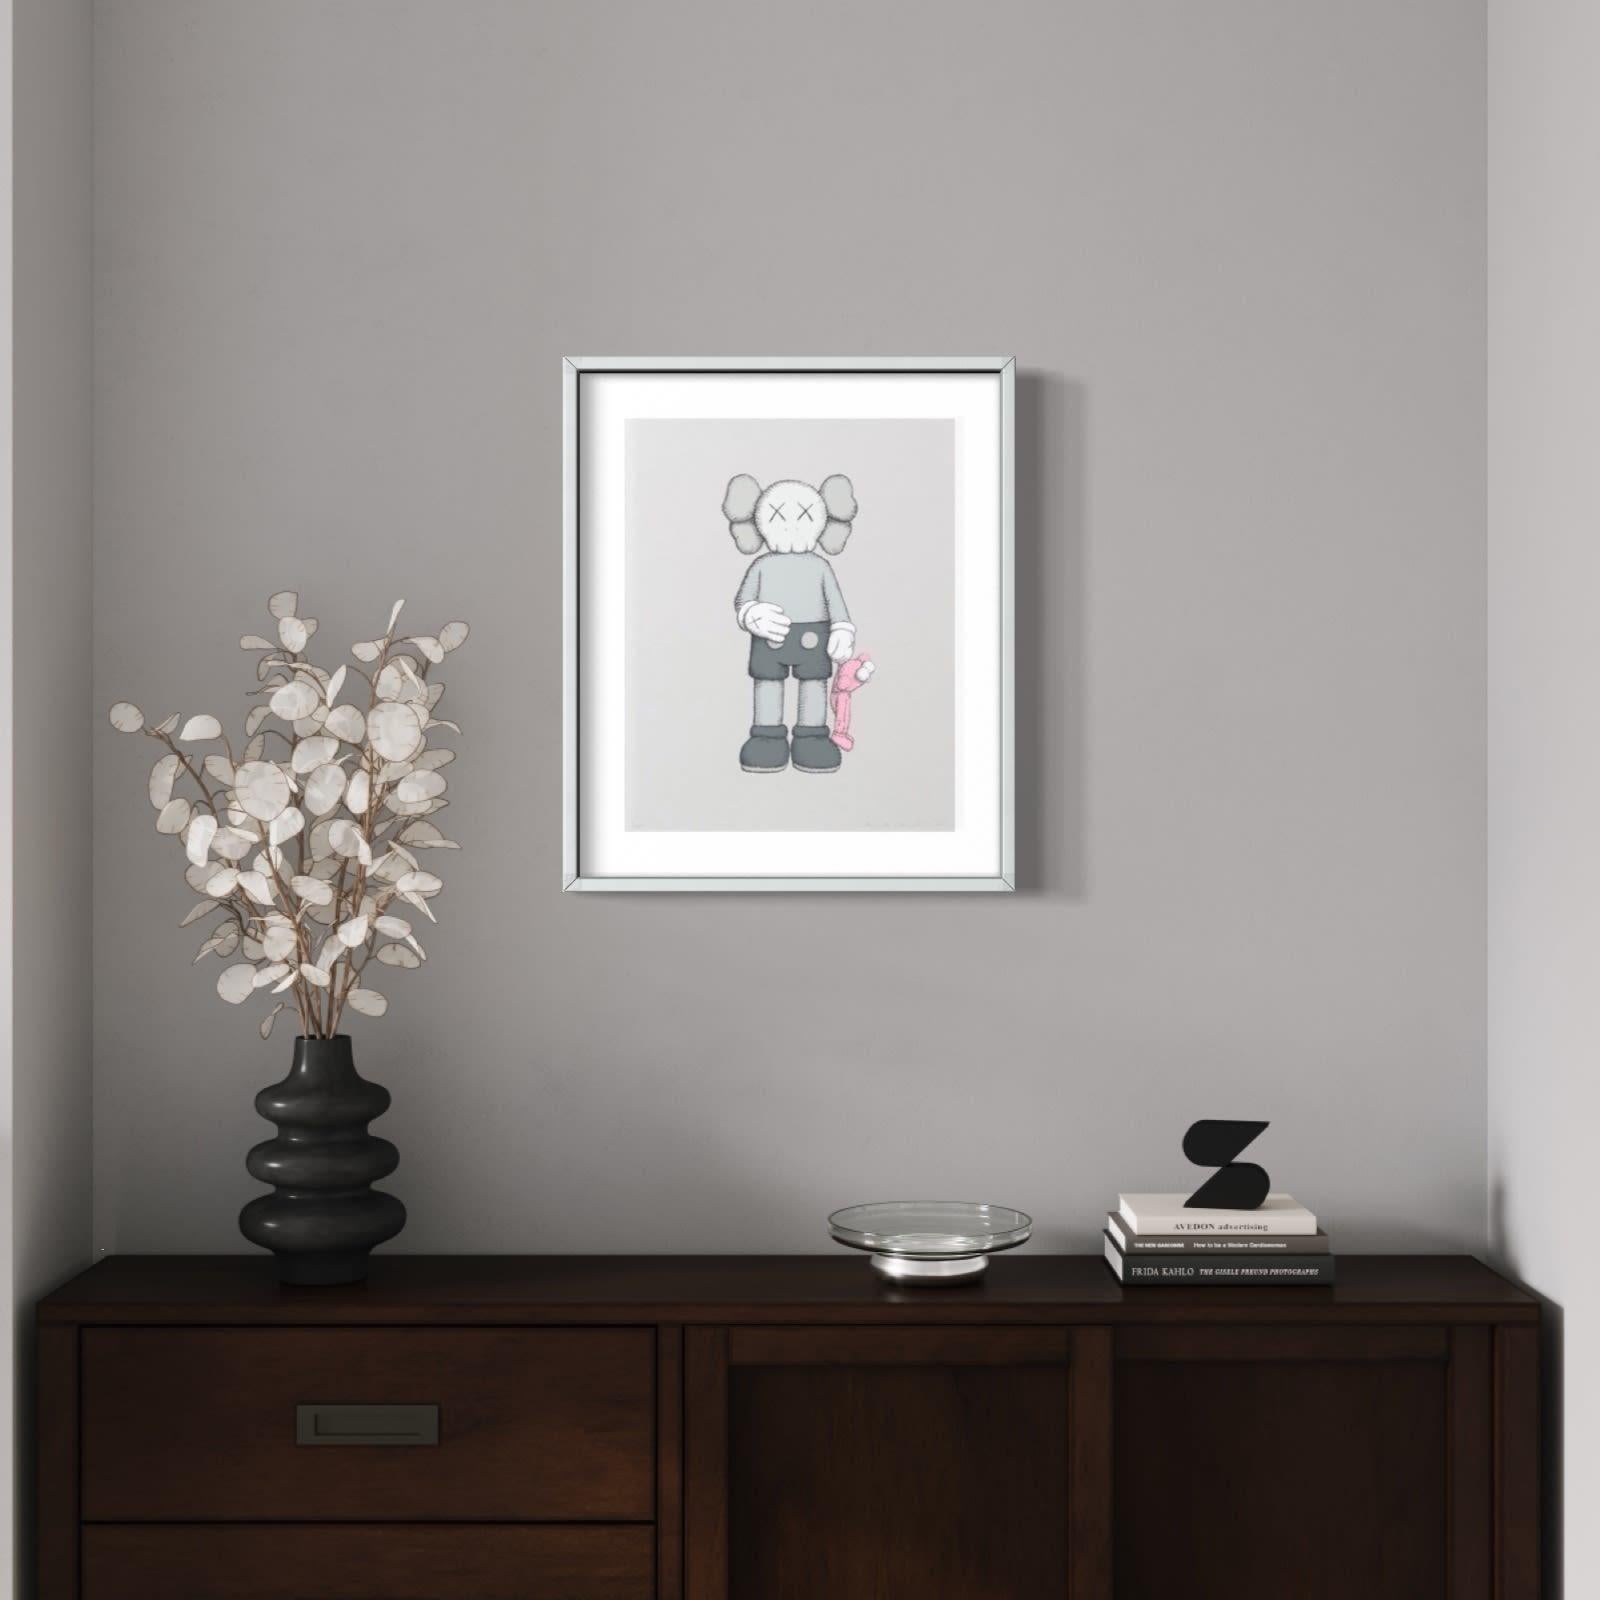 Share, 2020
Screenprint on Stonhenge grey paper
Signed, numbered and dated 
In mint condition (as acquired from the publisher)
The piece is offered unframed.
Edition number might vary from what is shown in the images.

KAWS’s COMPANIONS rank amongst